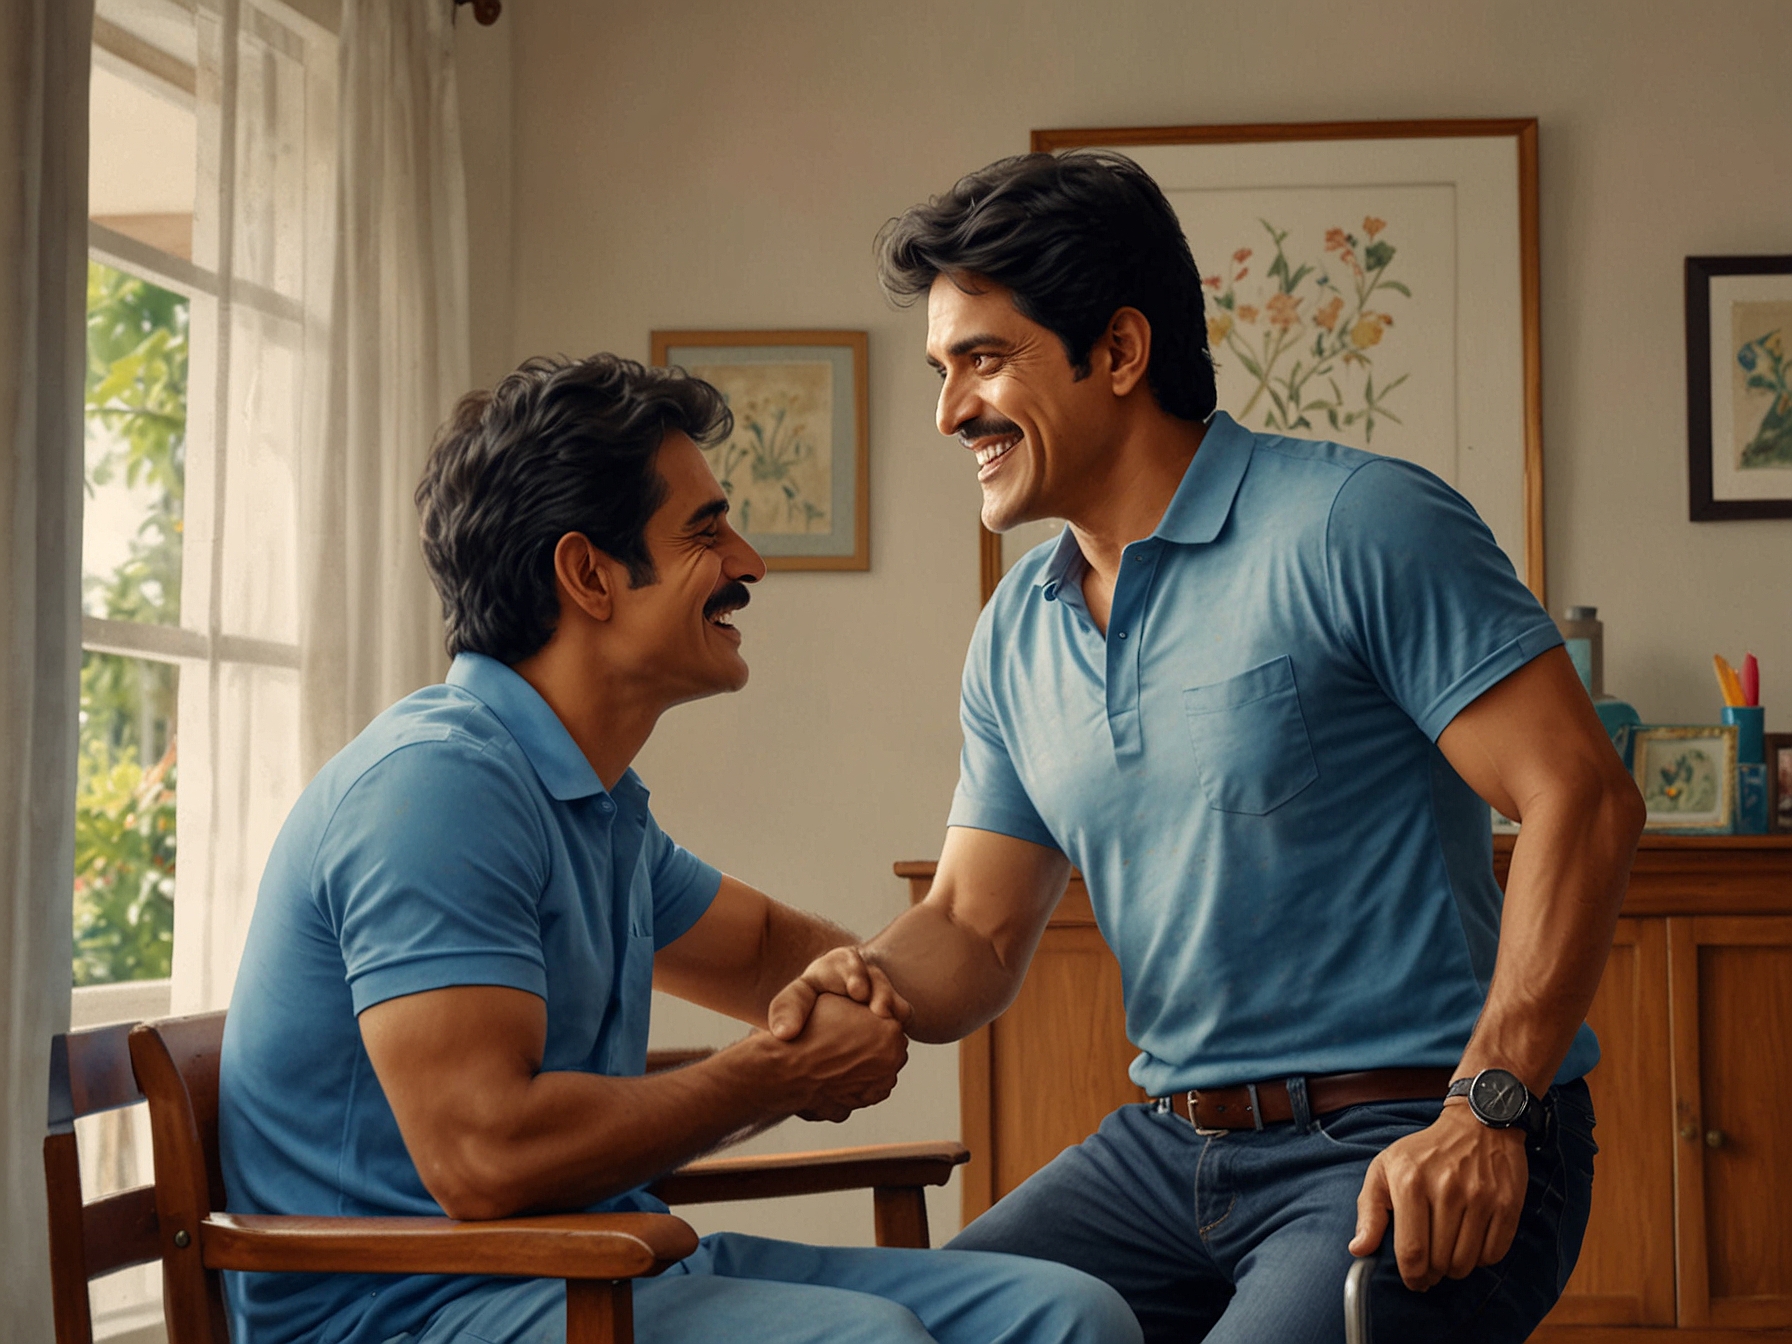 A heartwarming moment as Nagarjuna warmly receives his differently-abled fan at his home, showcasing a genuine interaction filled with smiles and meaningful conversation.